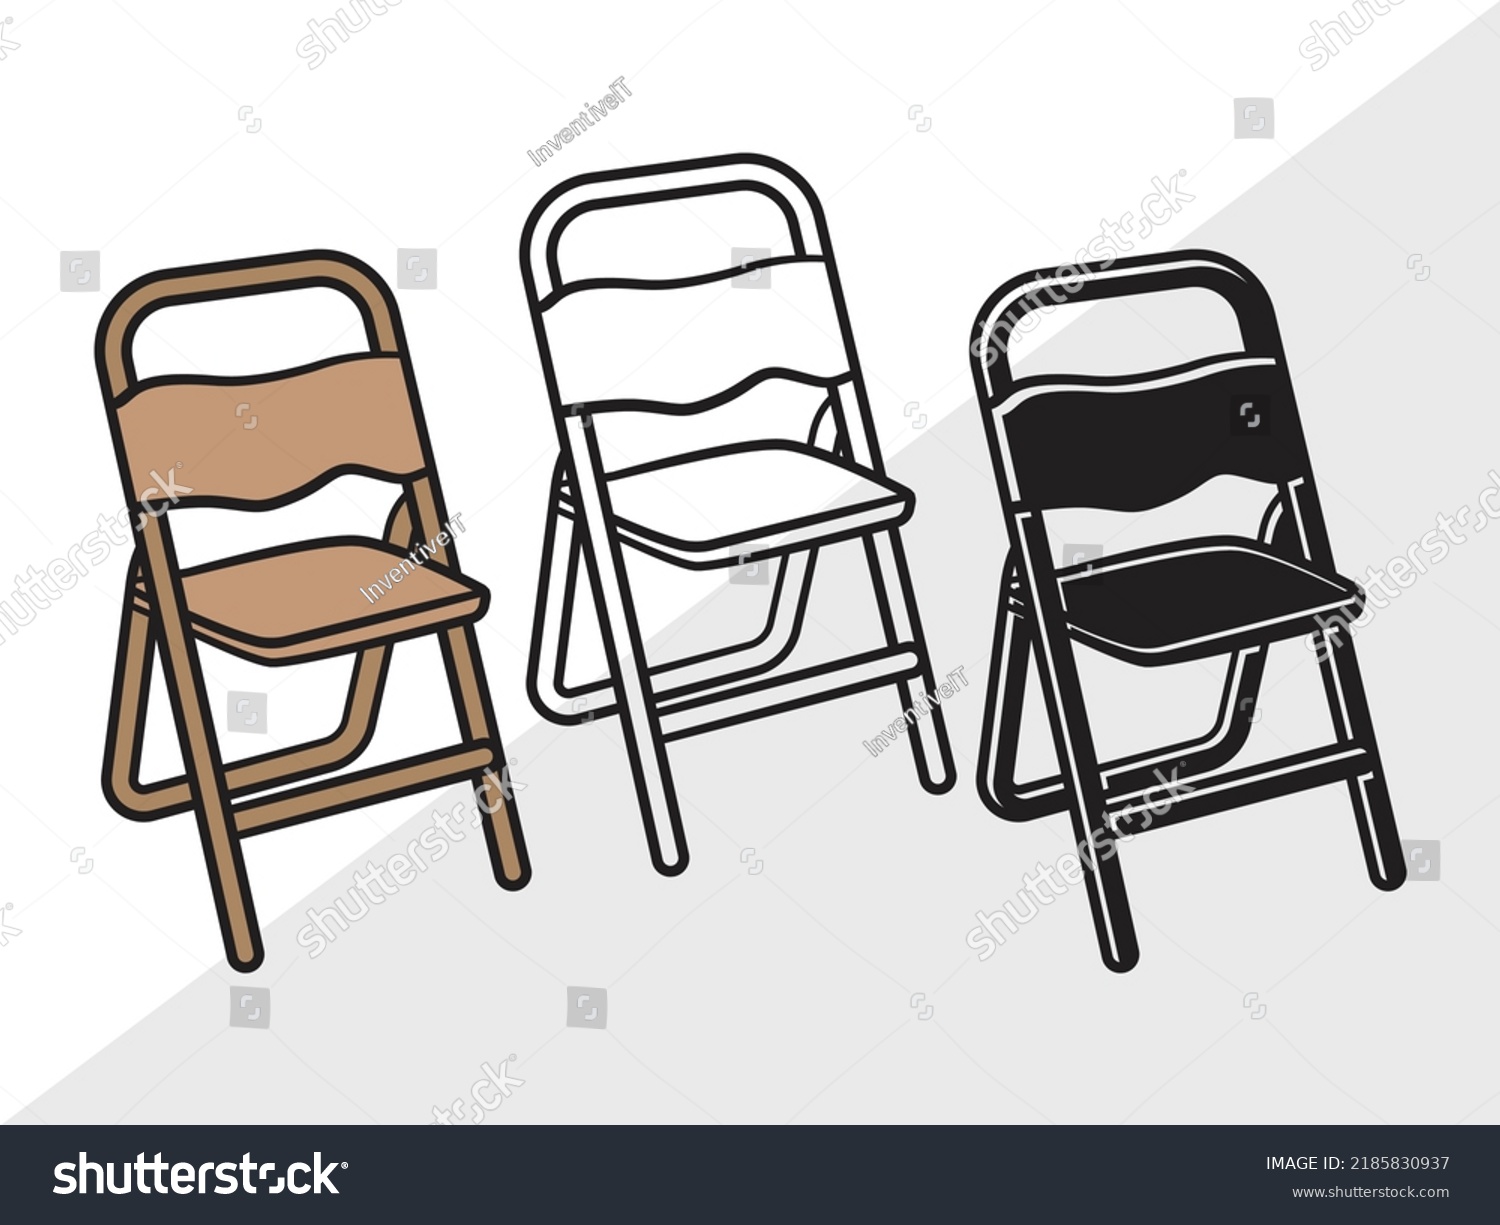 SVG of Chairs Clipart SVG Printable Vector Illustration svg